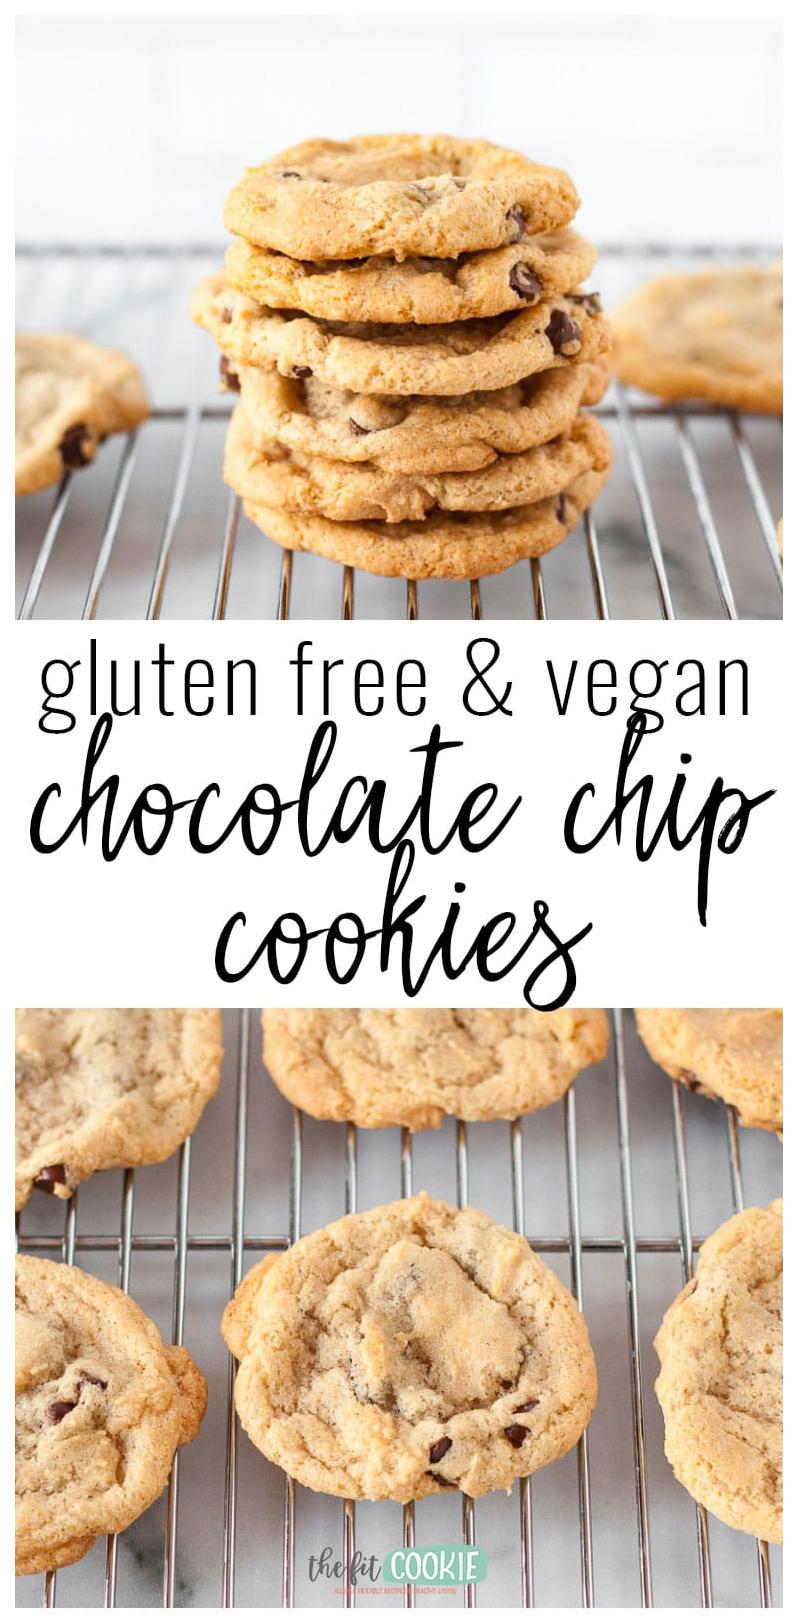  Chocolate chips + gluten-free flour + a little bit of love = the perfect cookie recipe!